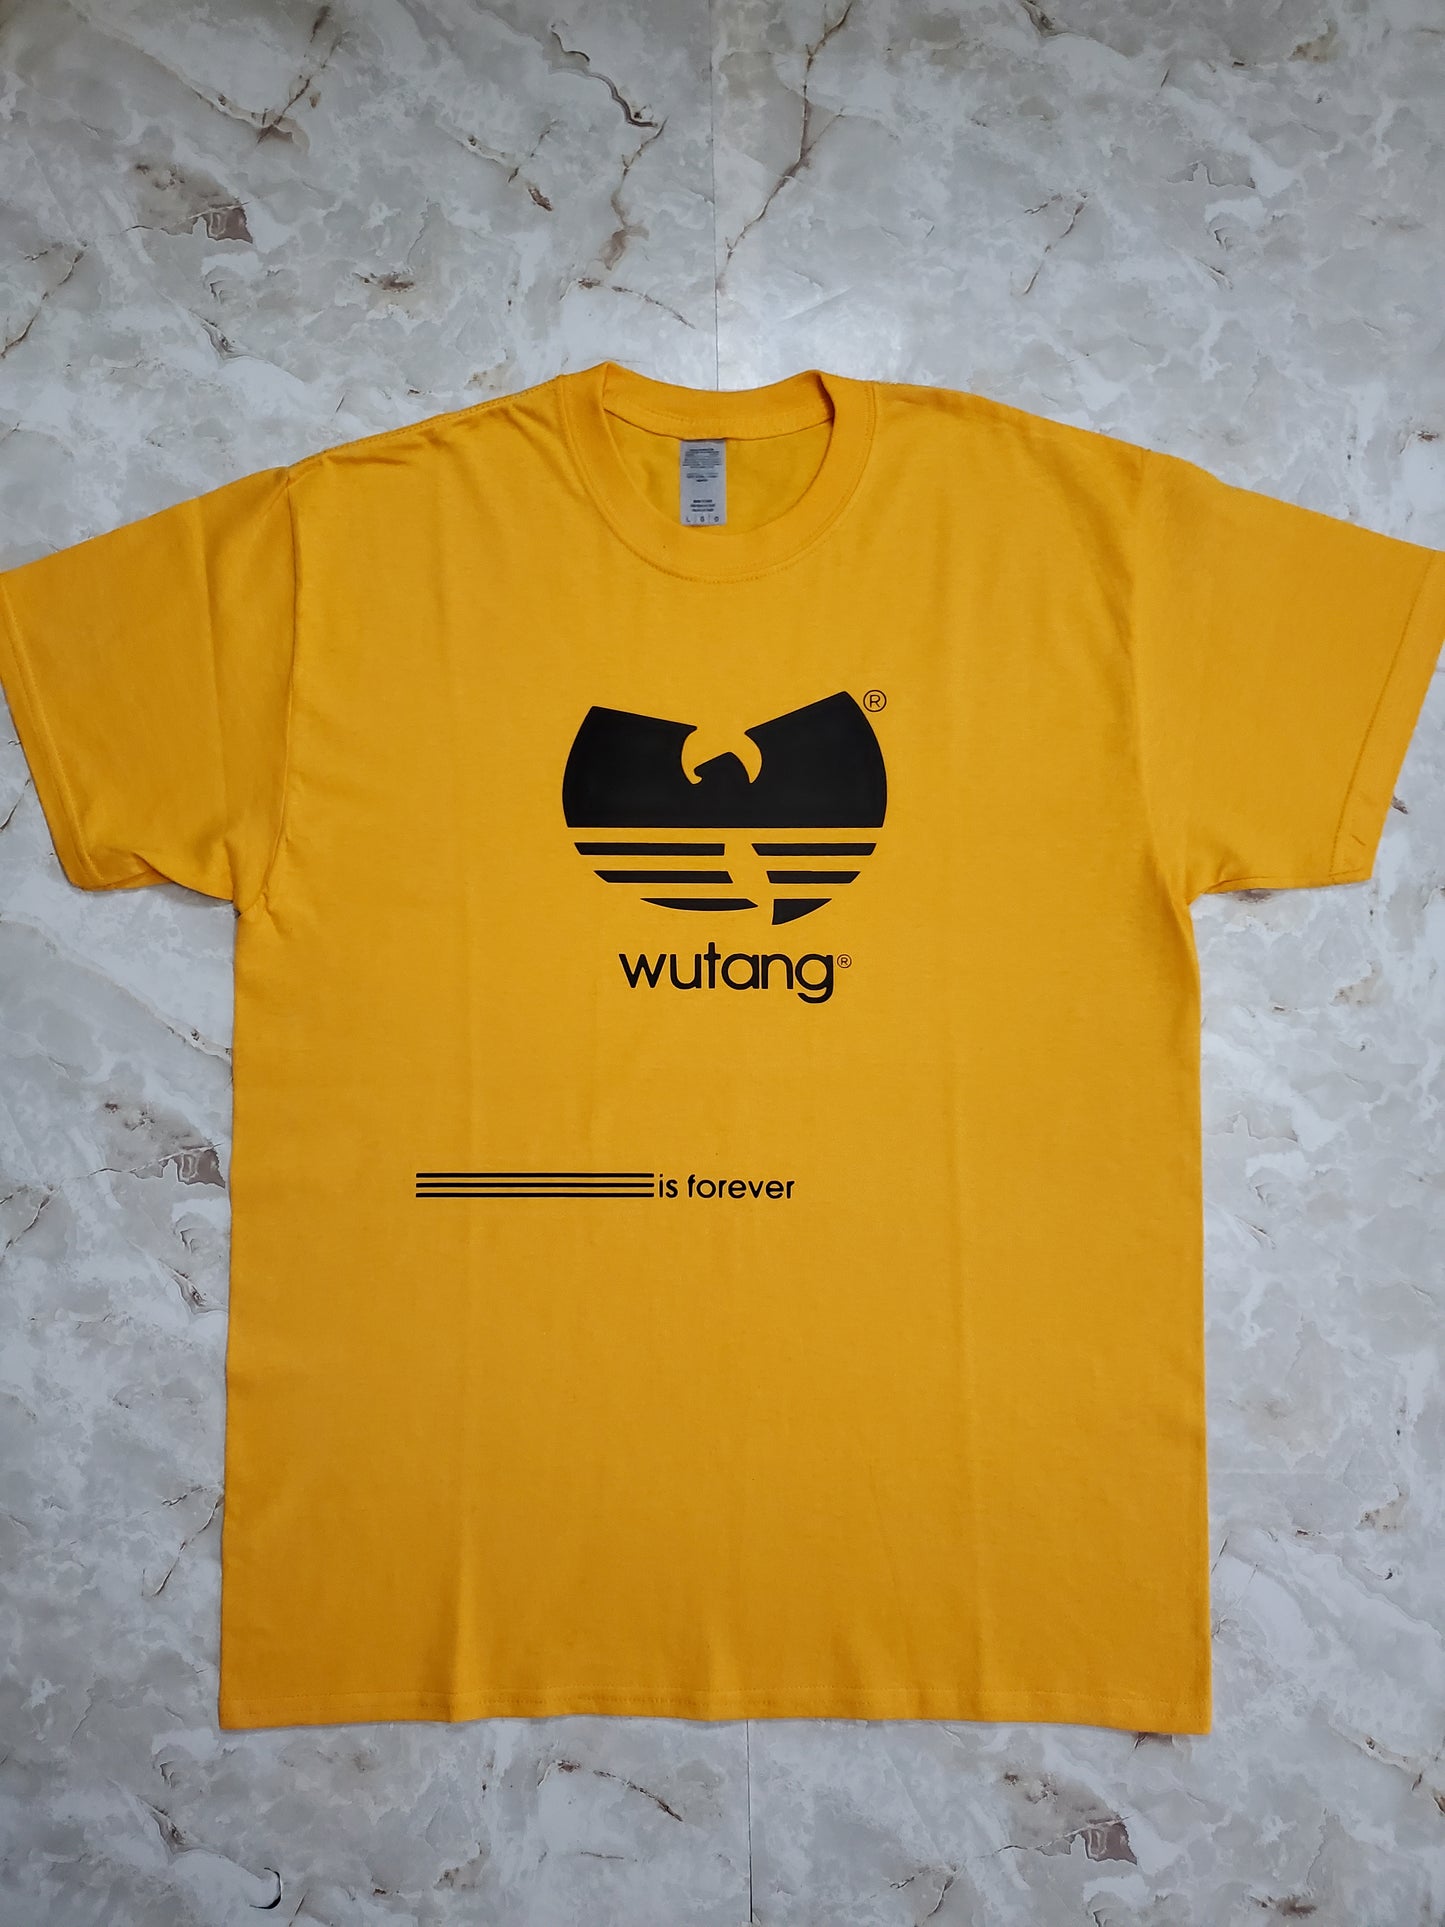 Wudidas T-Shirt - Centre Ave Clothing Co.